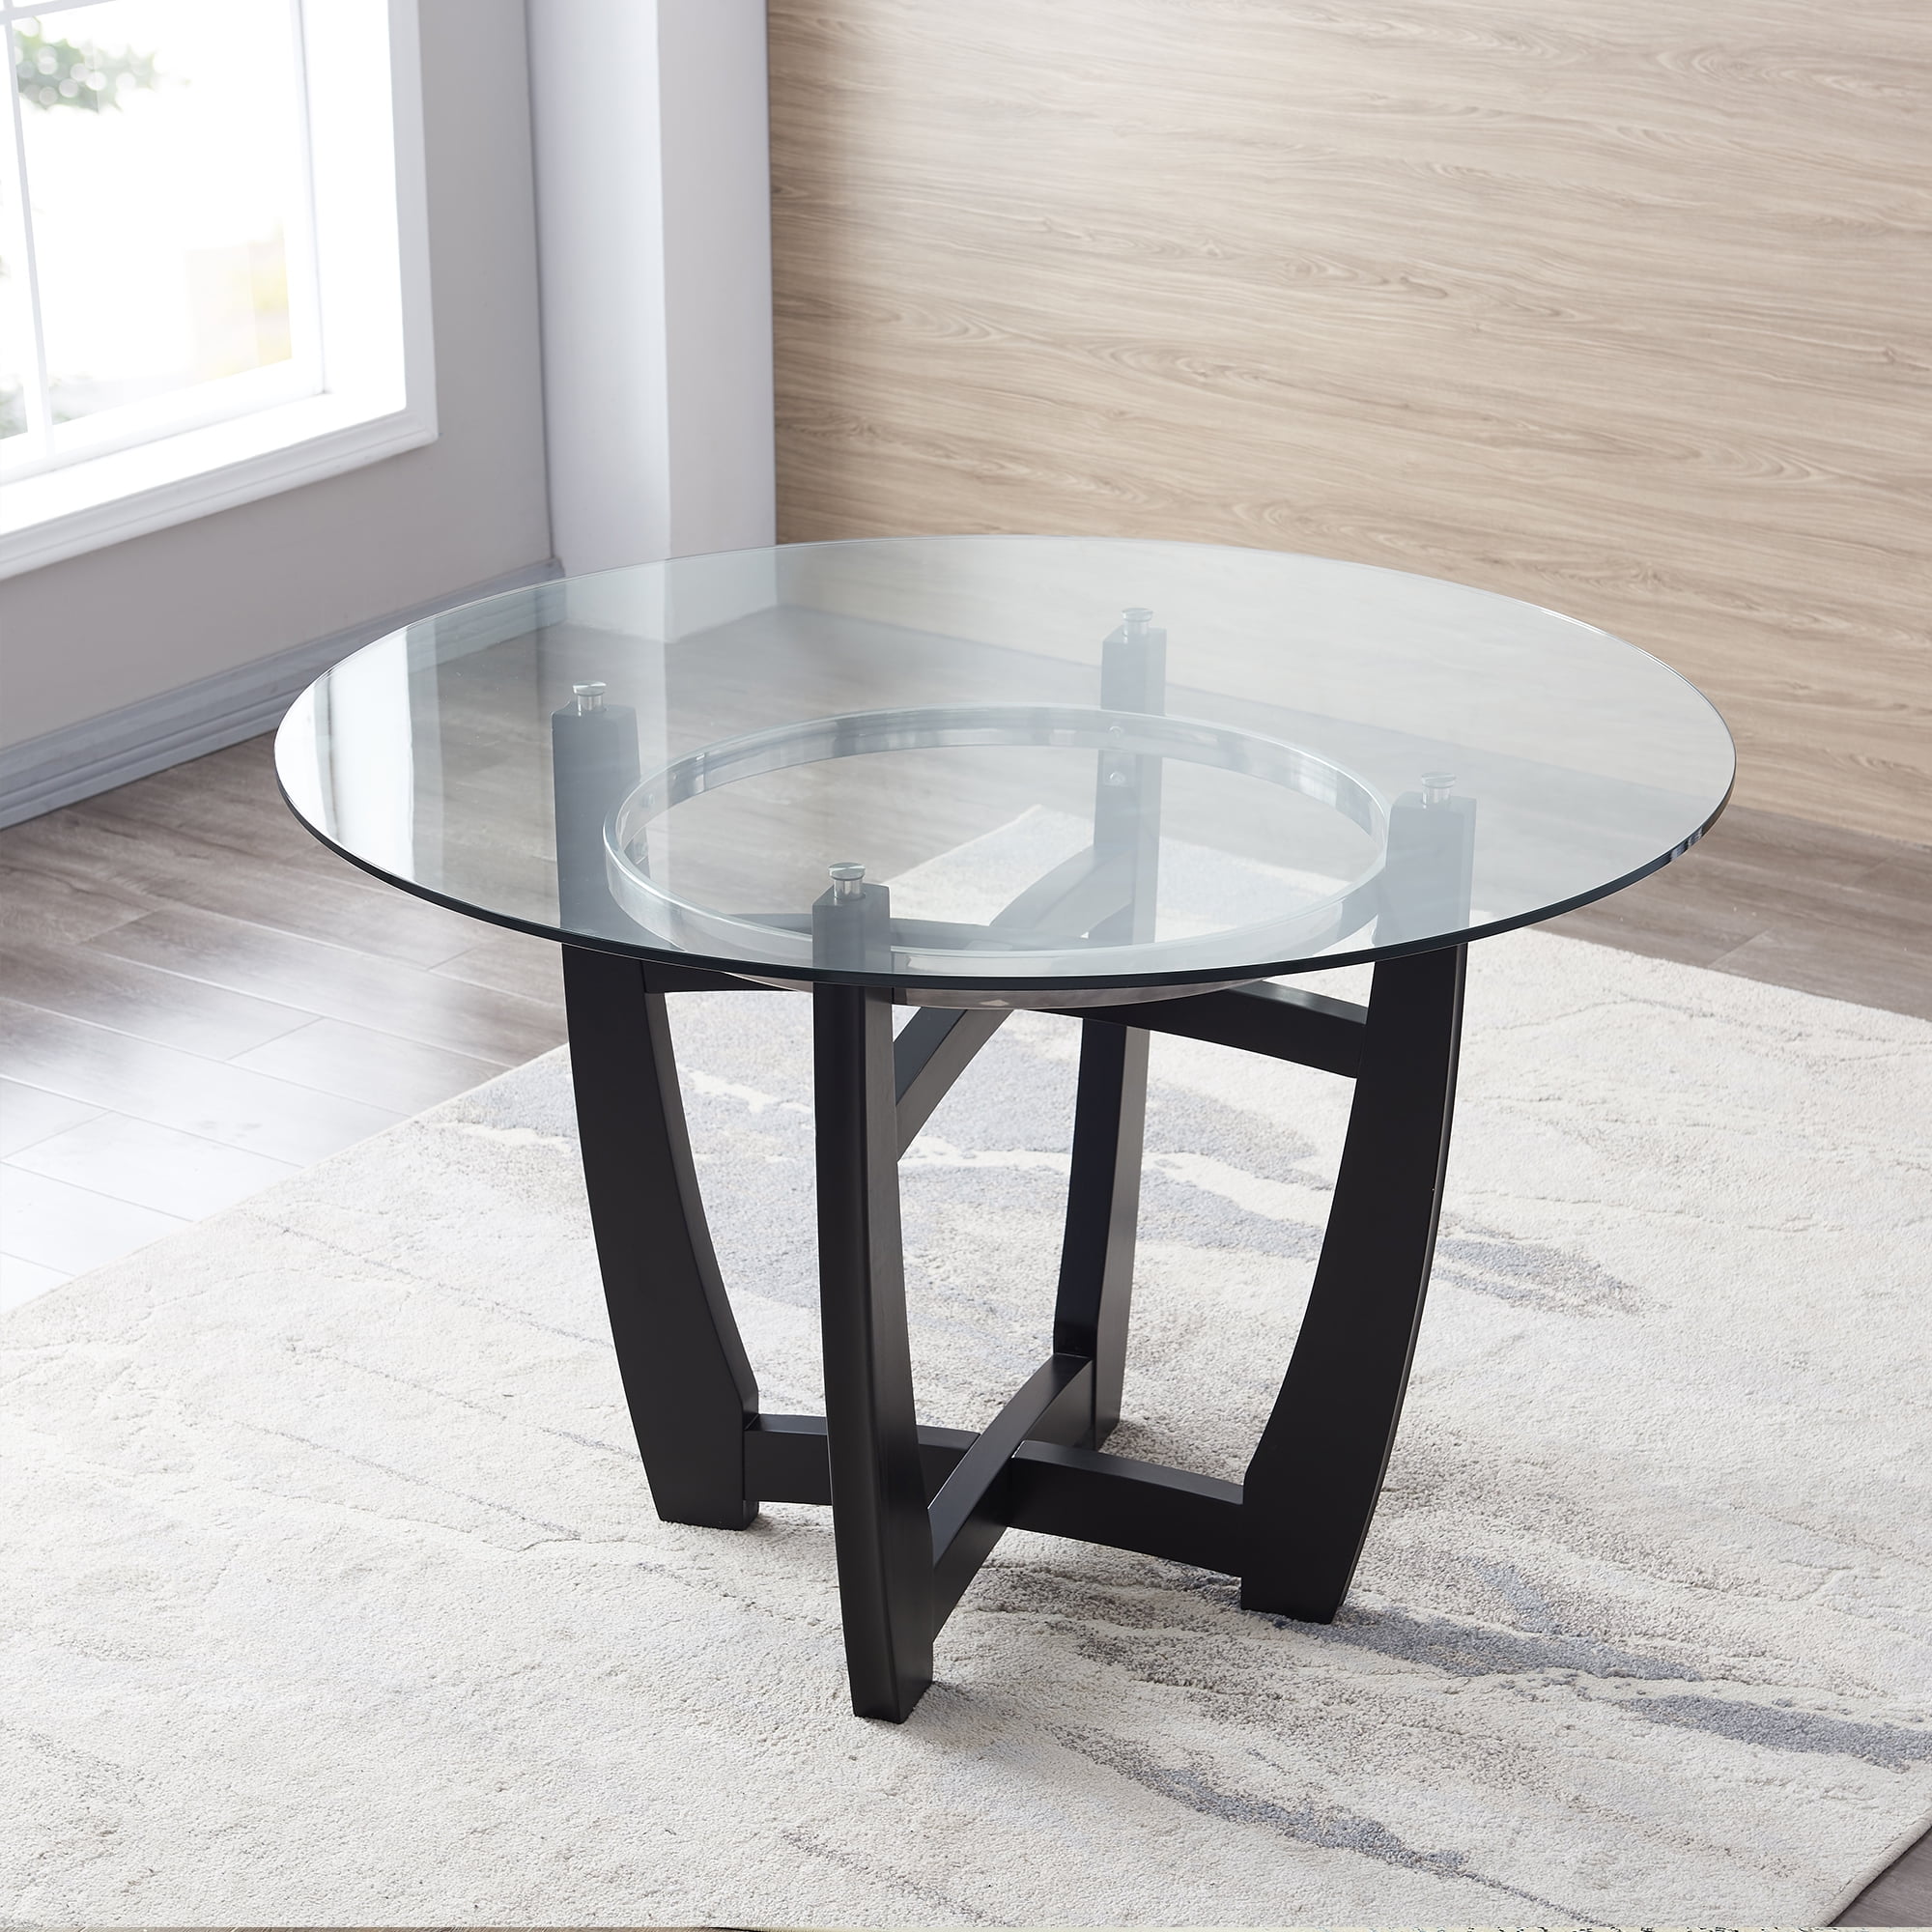 11+ Modern Round Glass And Wood Coffee Table Images - glass top oval